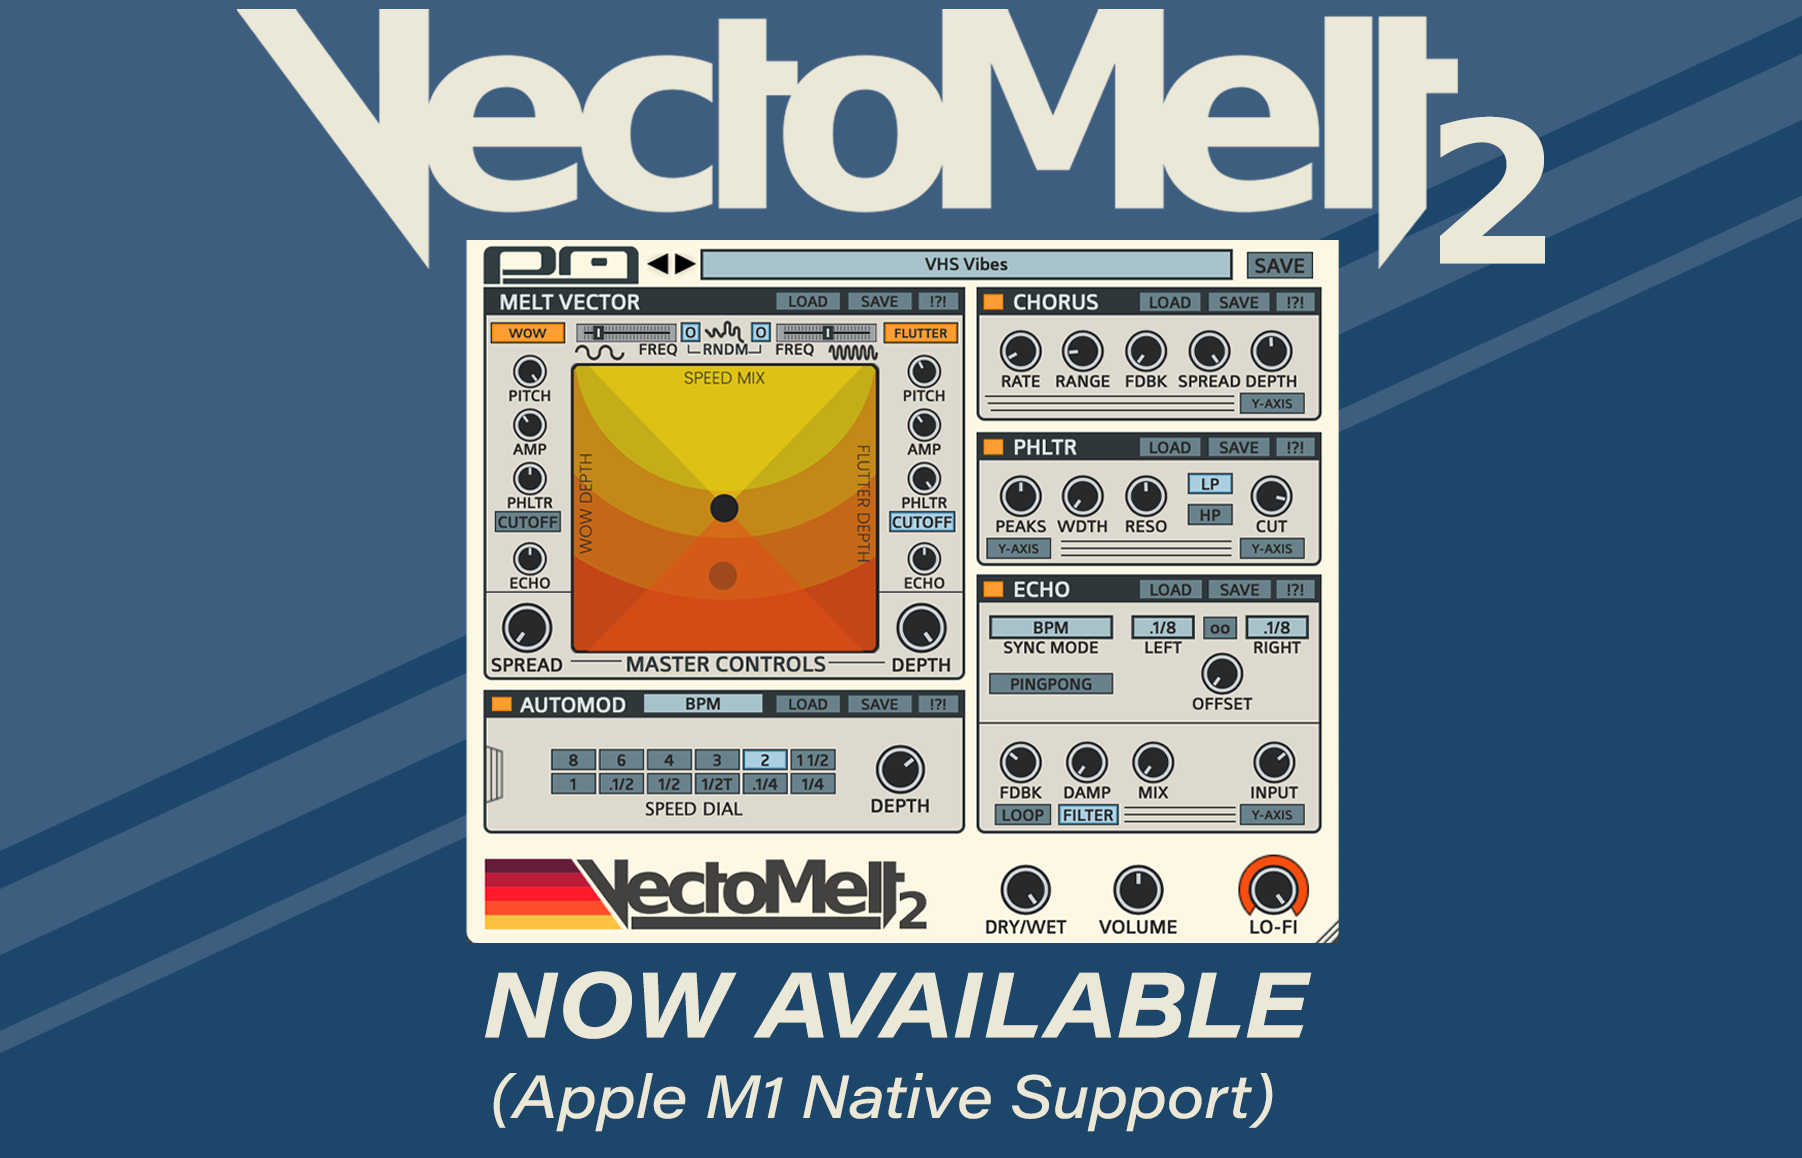 VectoMelt2 is now available!